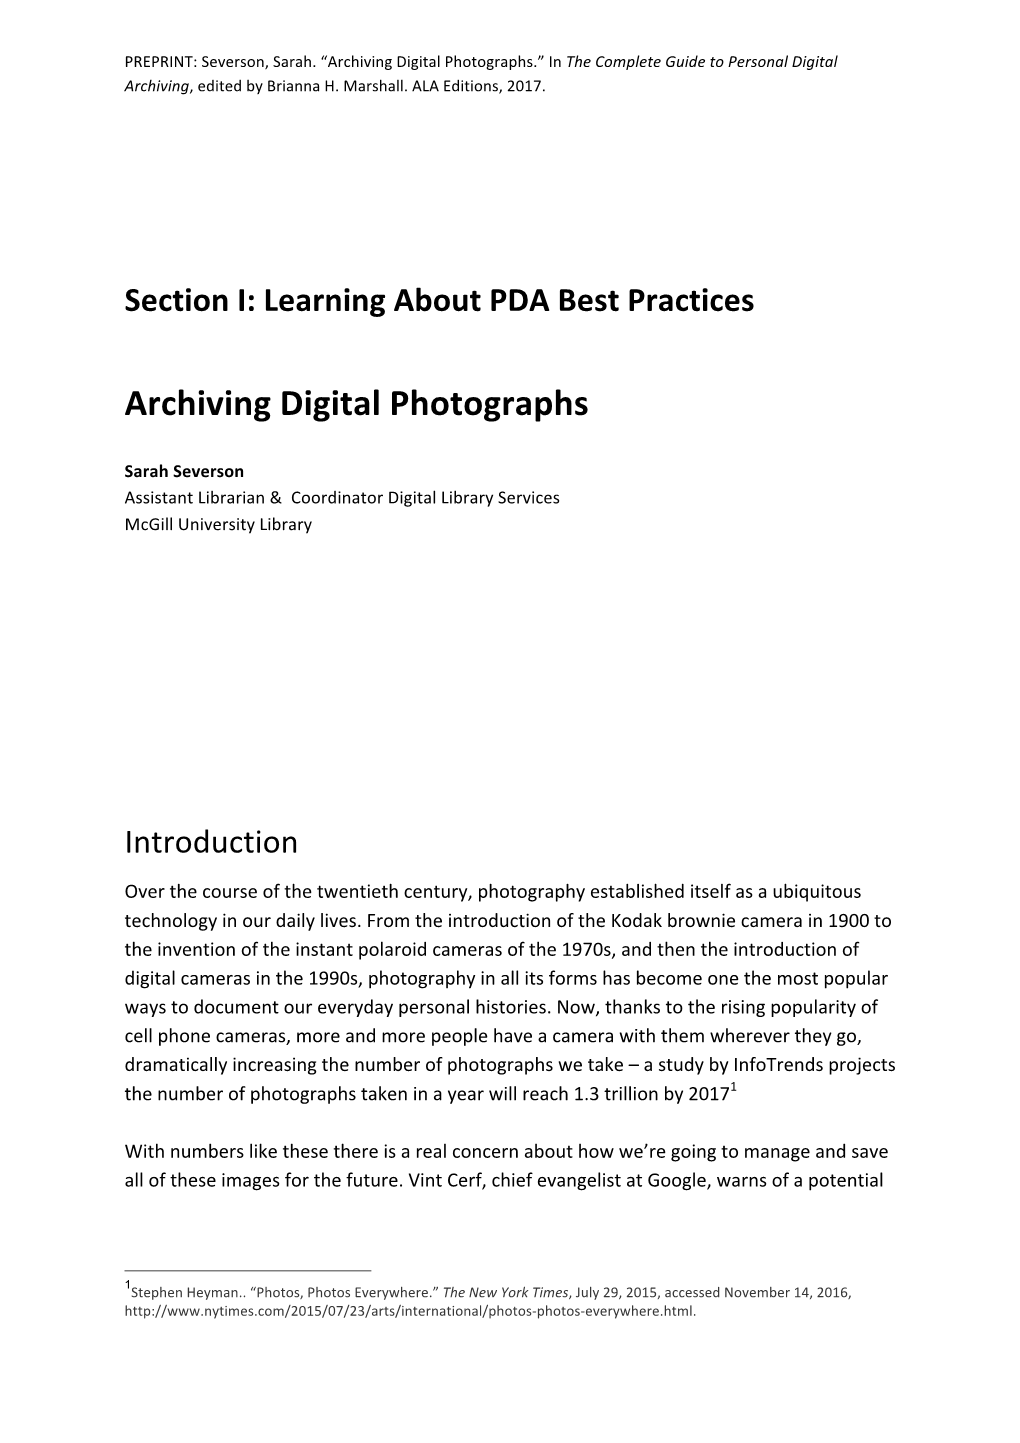 Archiving Digital Photographs.” in the Complete Guide to Personal Digital Archiving, Edited by Brianna H